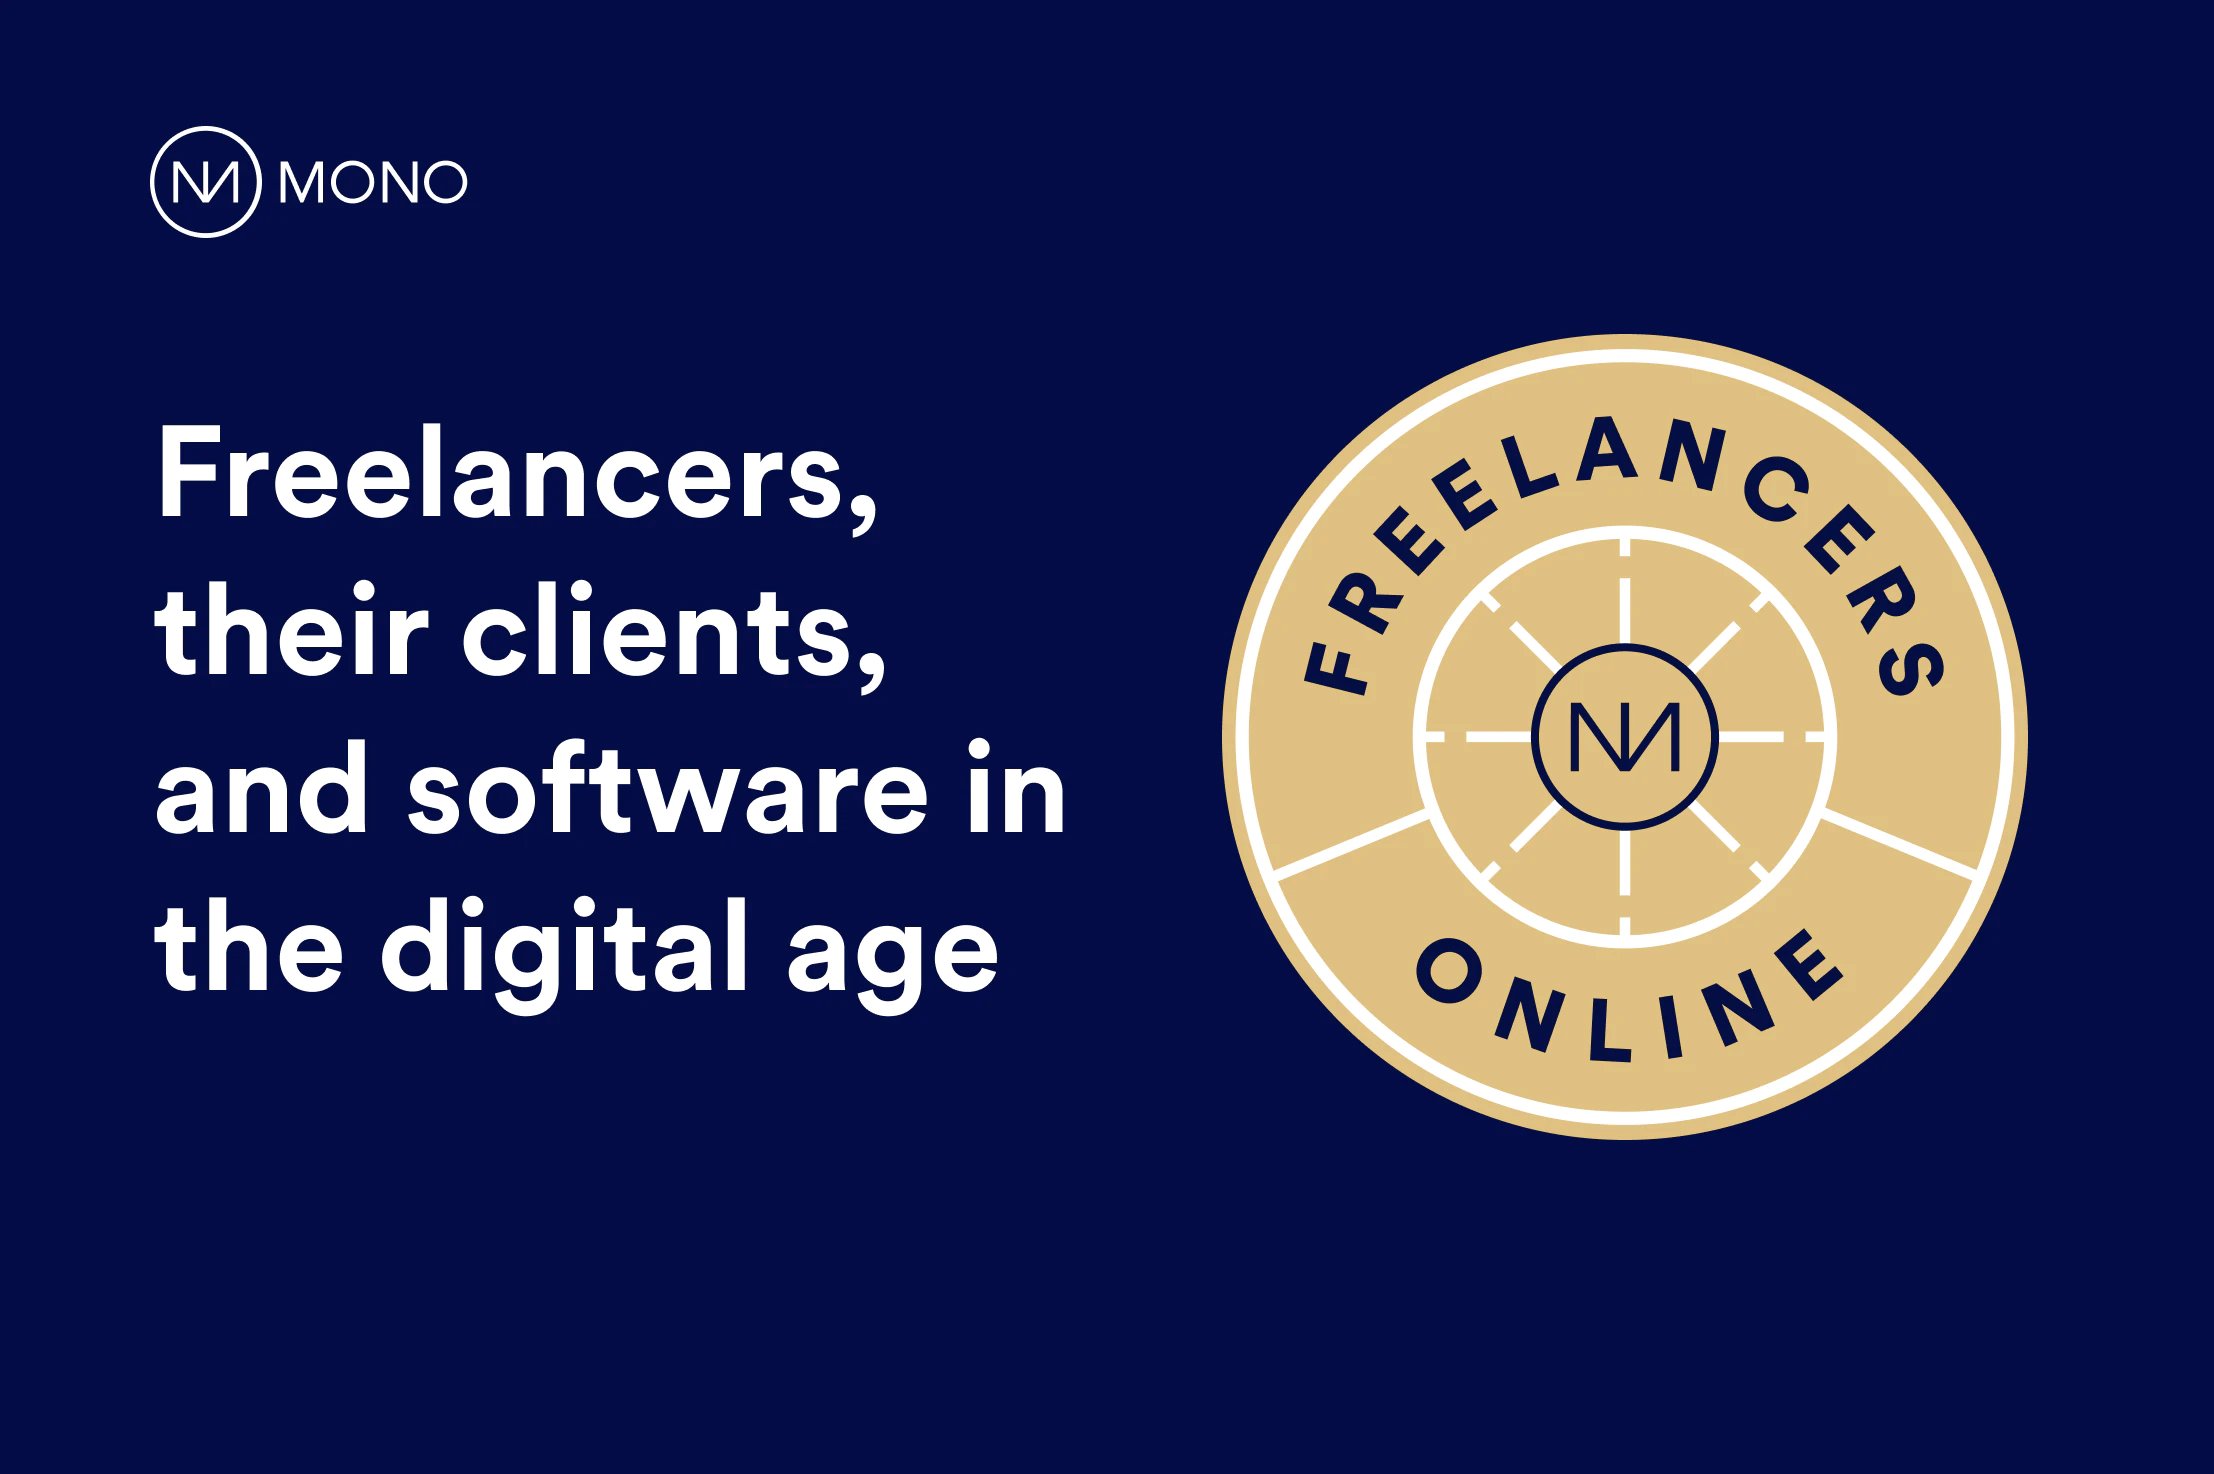 Freelancers, their clients, and software in the digital age